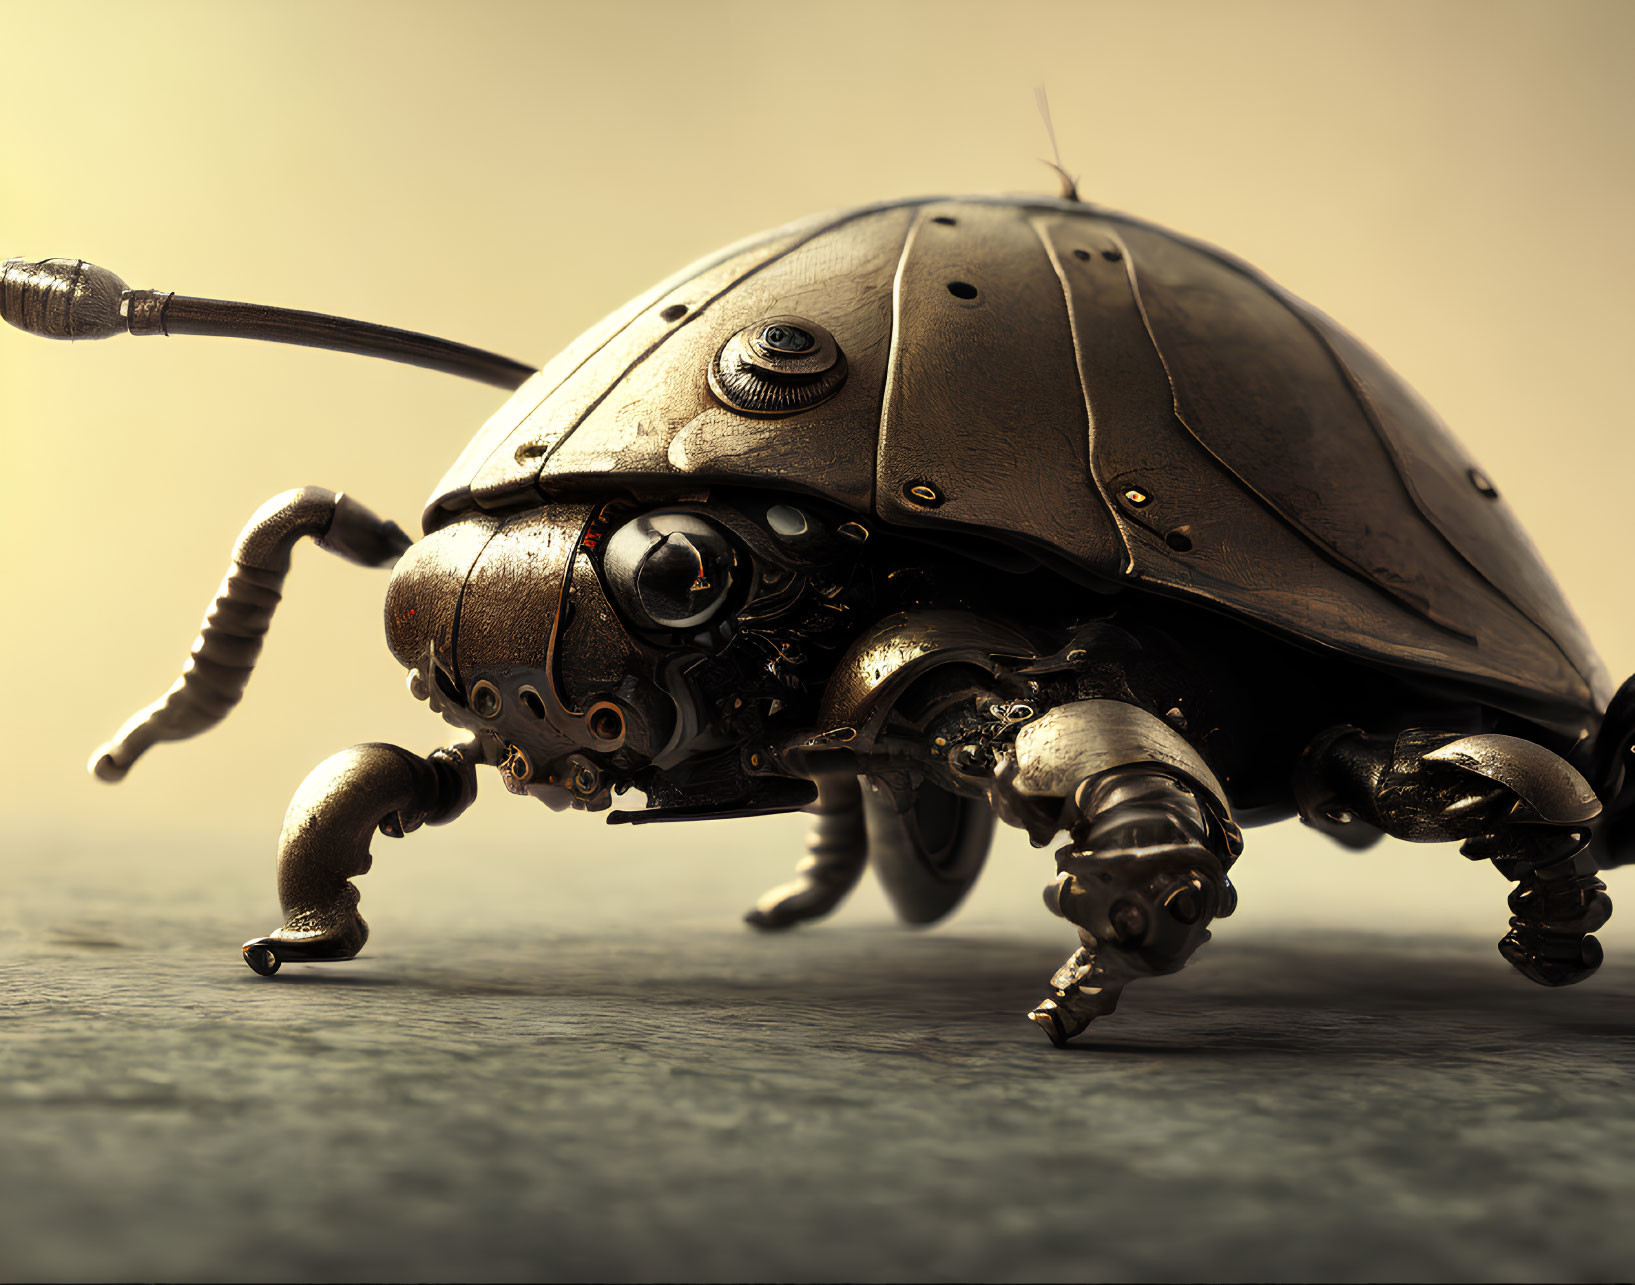 Detailed Illustration of Mechanical Beetle with Metallic Joints and Gears